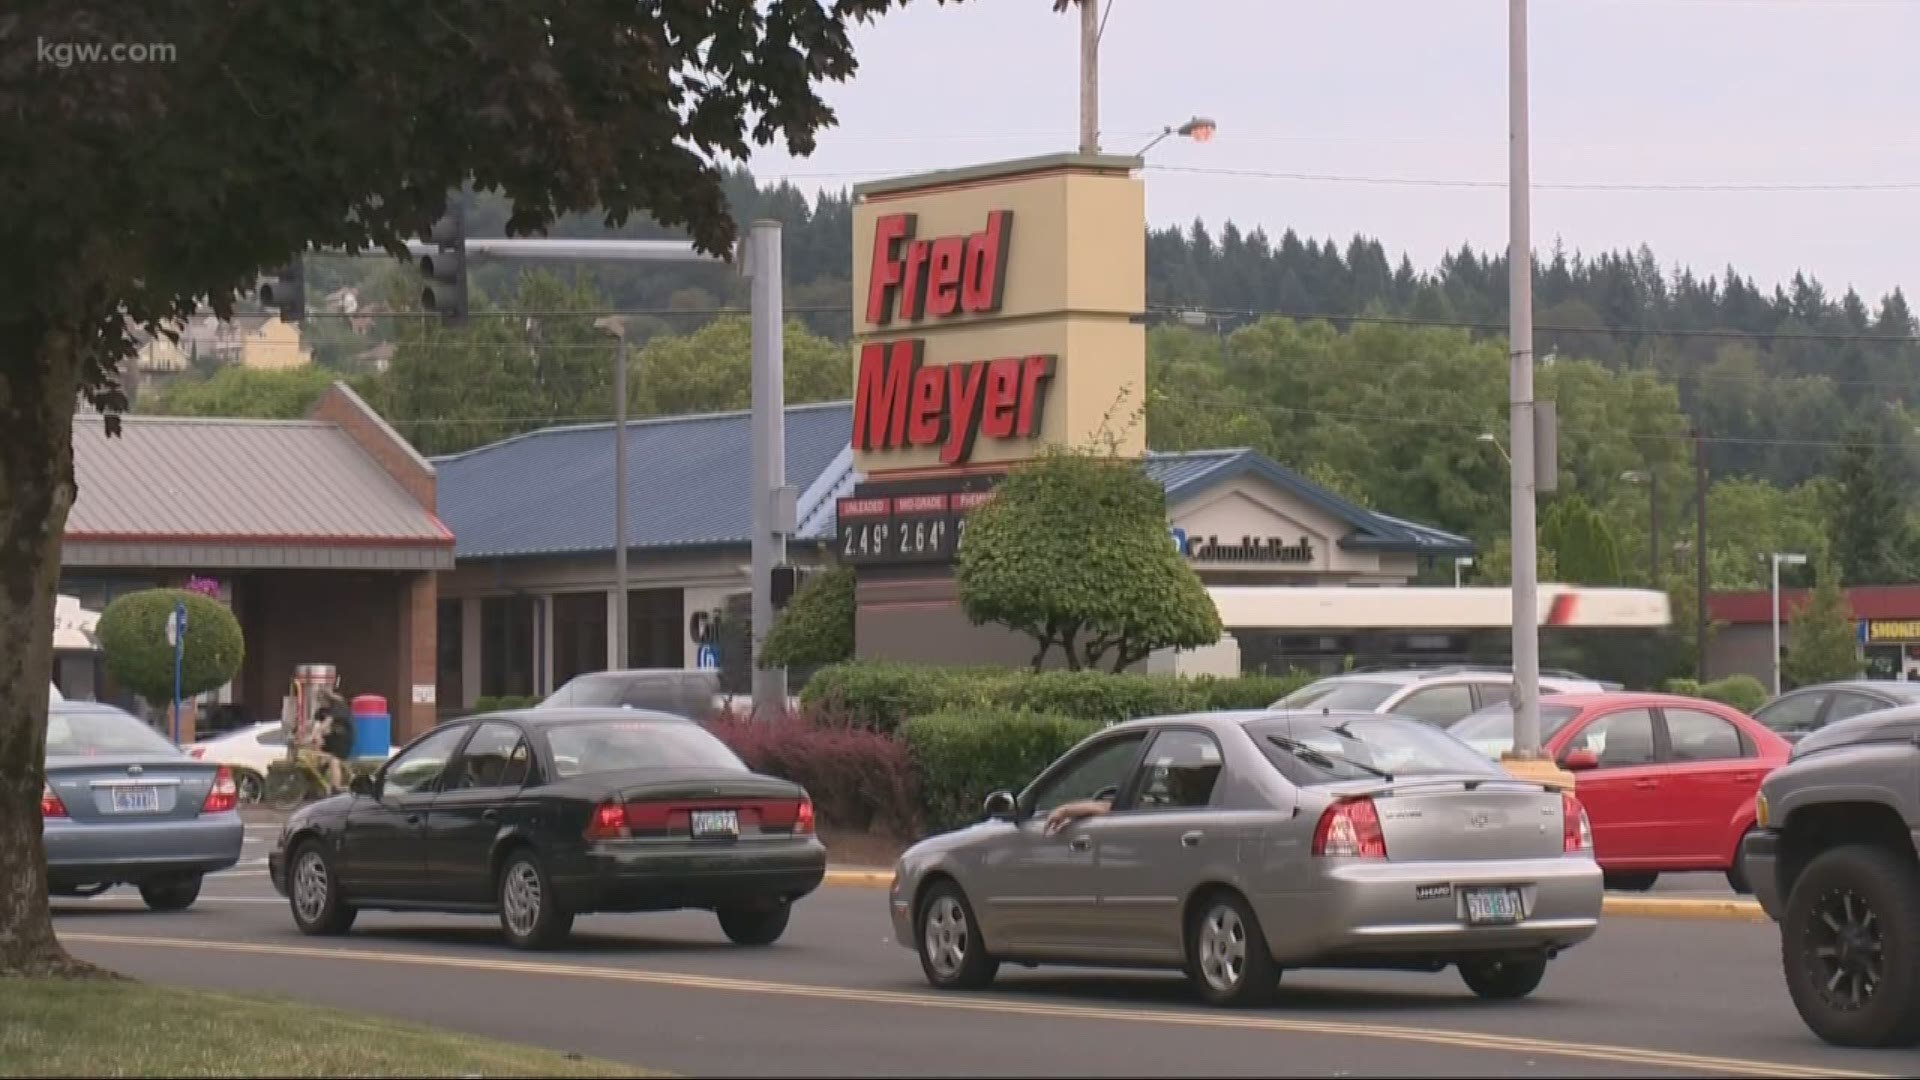 The union representing grocery workers in our region is calling for people to boycott Fred Meyer.